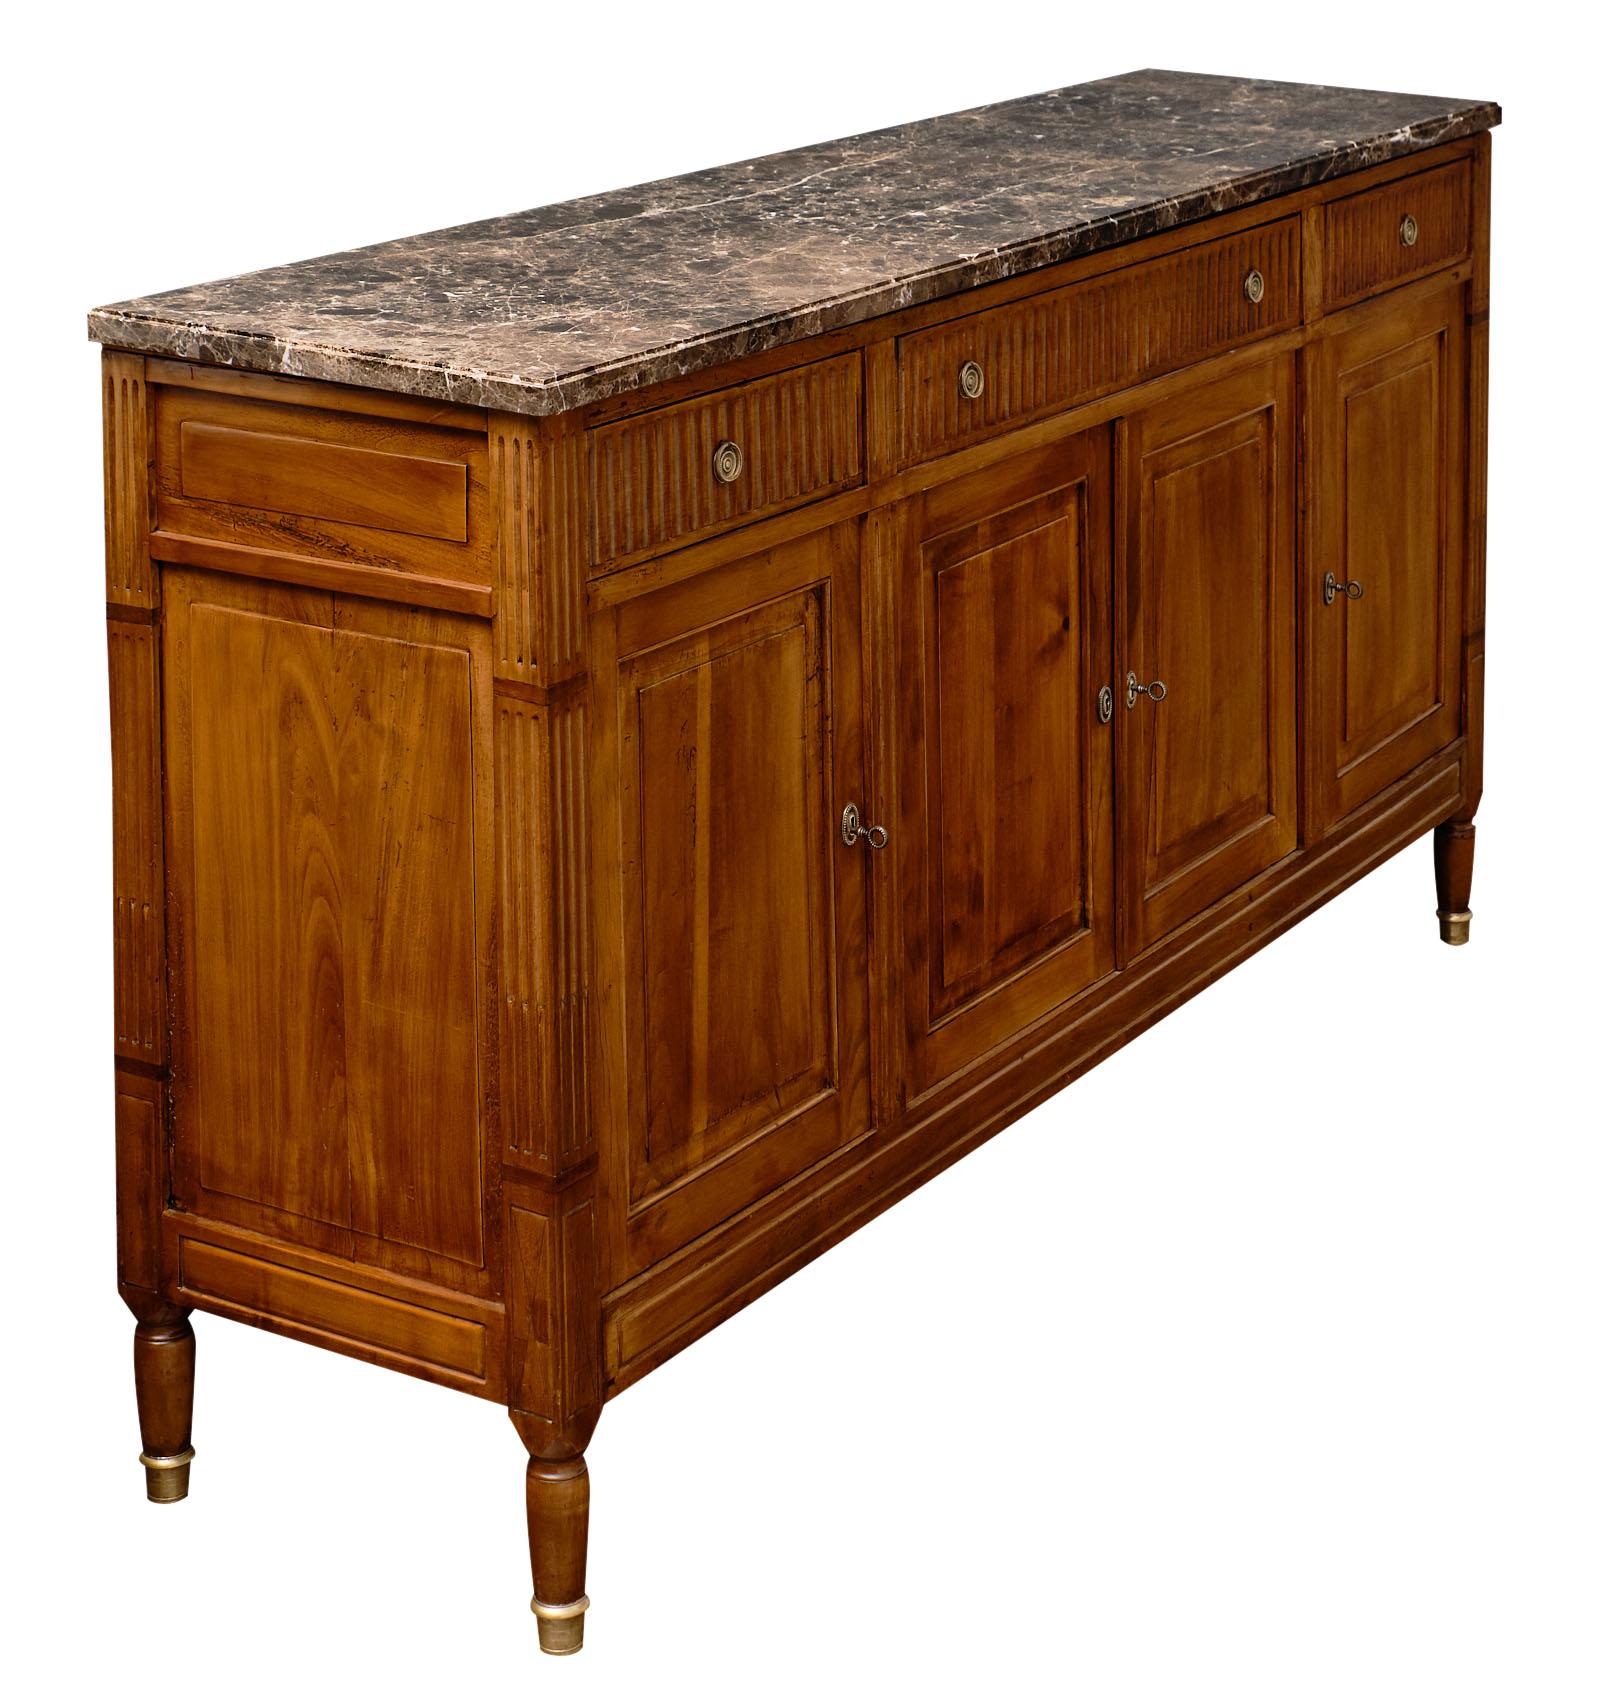 French antique Louis XVI style walnut buffet. This piece is made of figured blonde walnut wood from the Rhone Valley with hand carved details throughout. We love this Classic credenza’s dovetailed drawers and four doors opening to adjustable